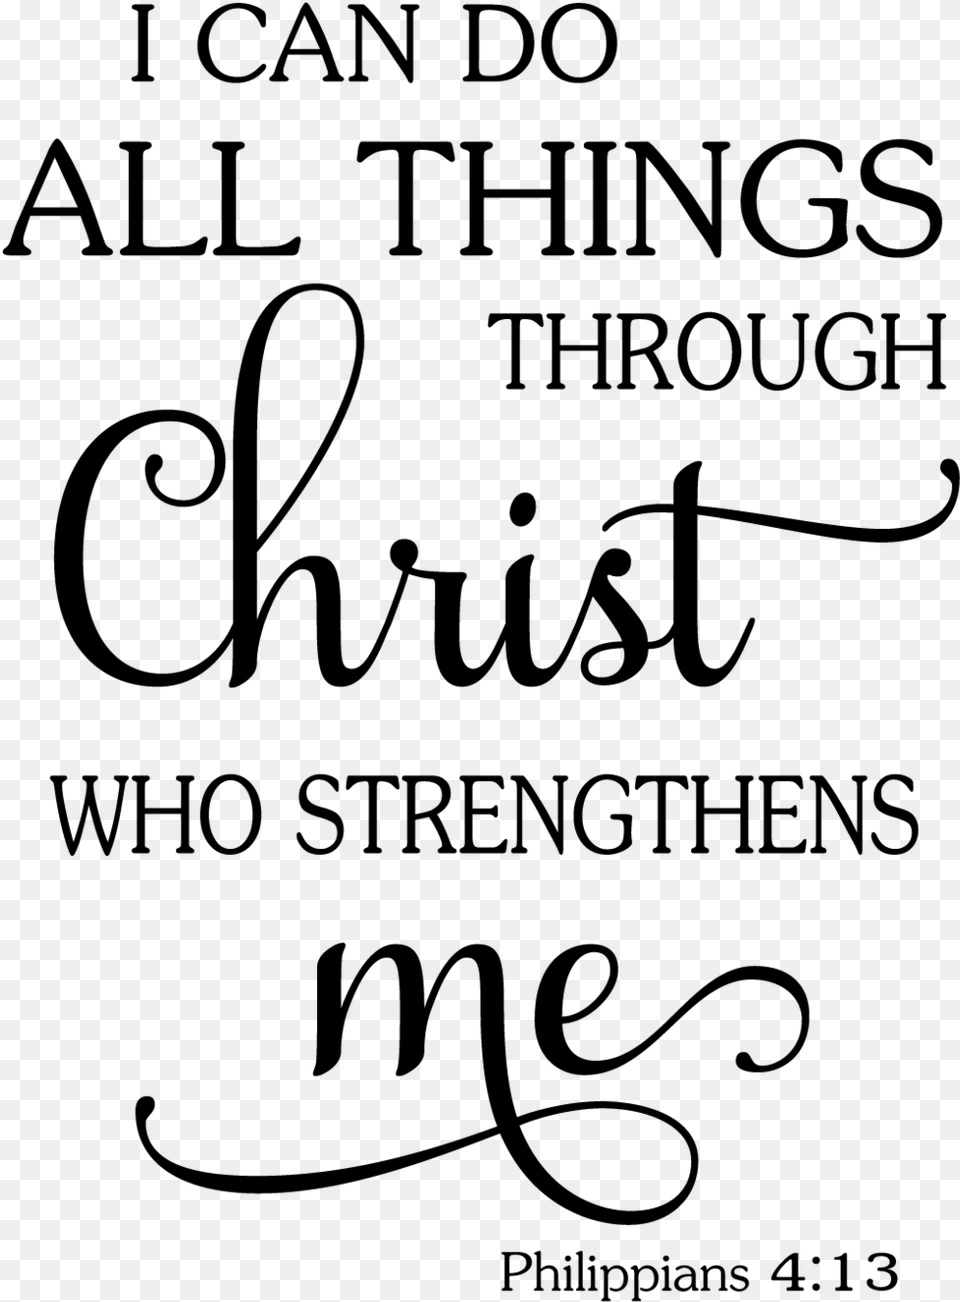 I Can Do All Things Stencil Only Sawdust Amp Swirls Can Do All Things Thru Christ, Gray Png Image